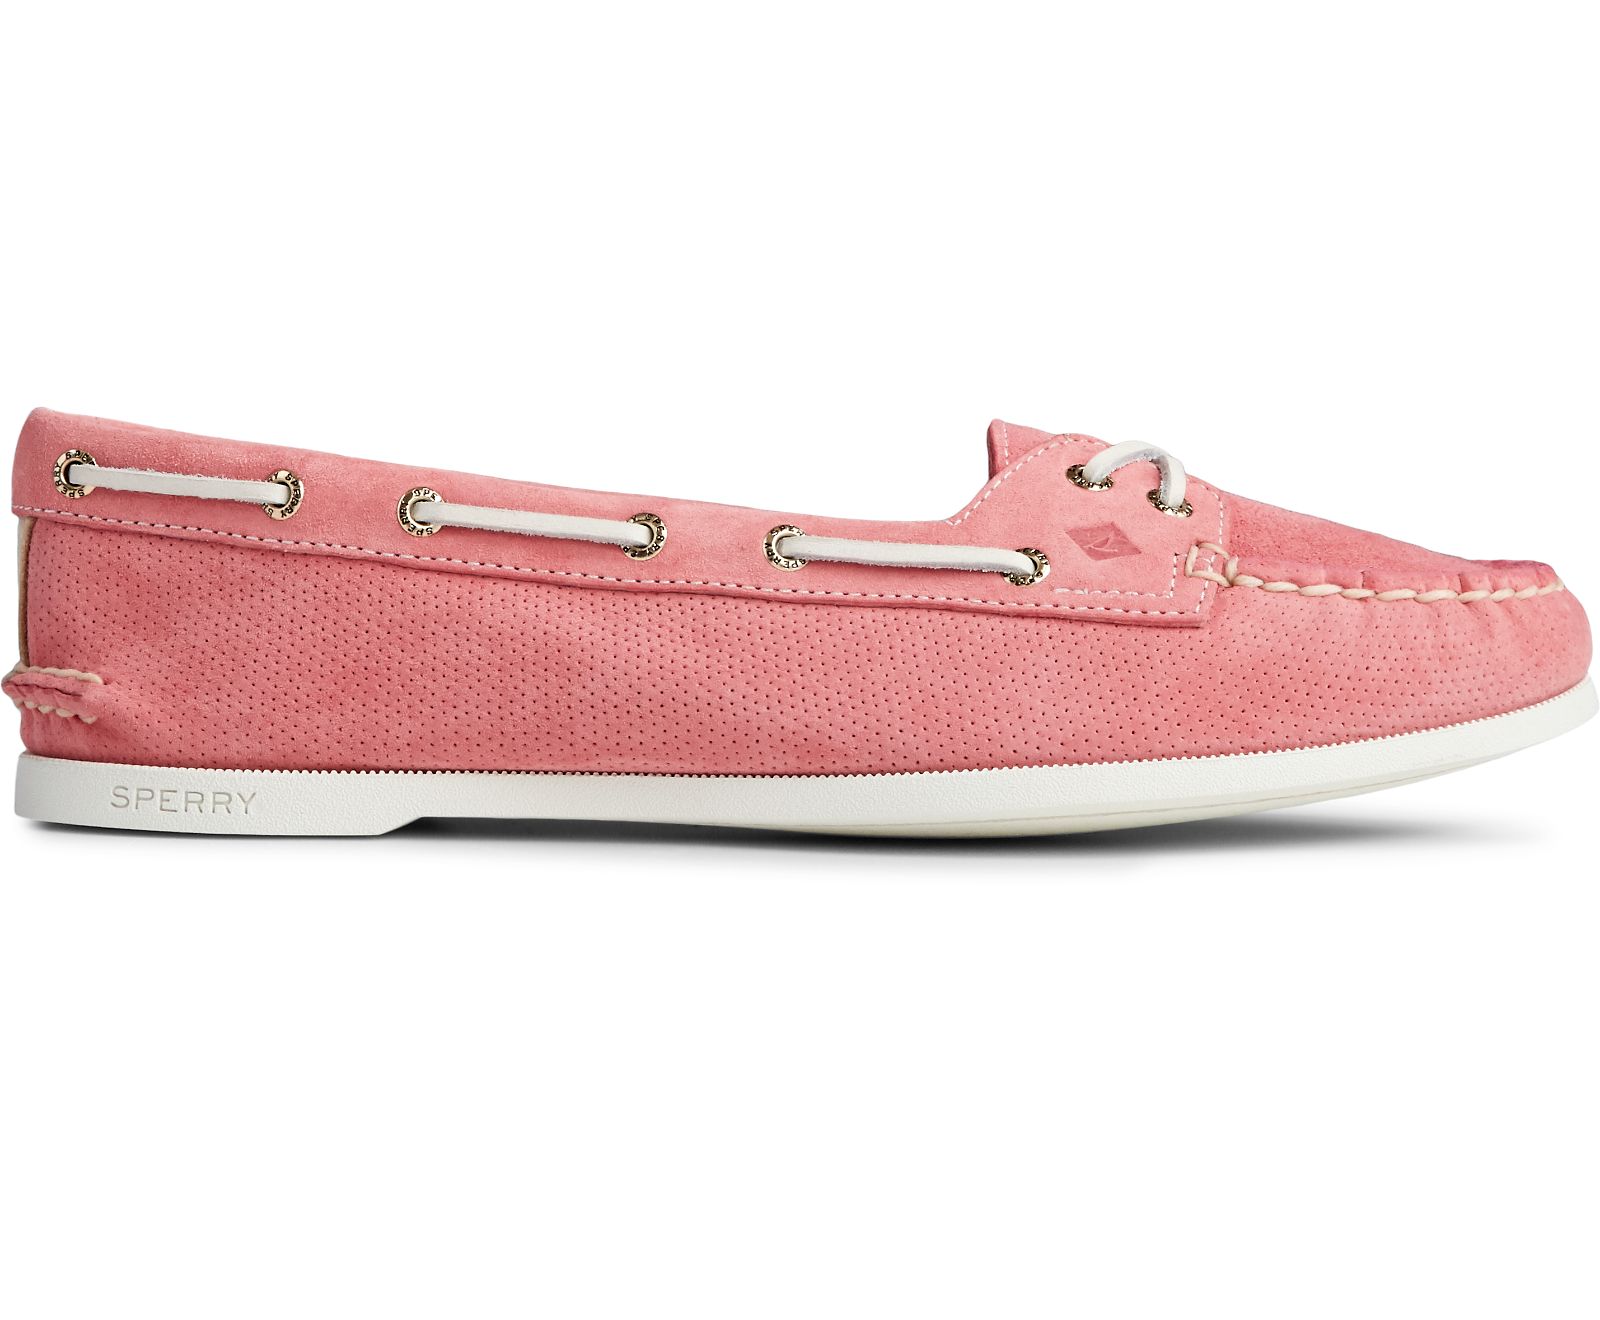 Women's Authentic Original Skimmer Pin Perforated Boat Shoe - Coral